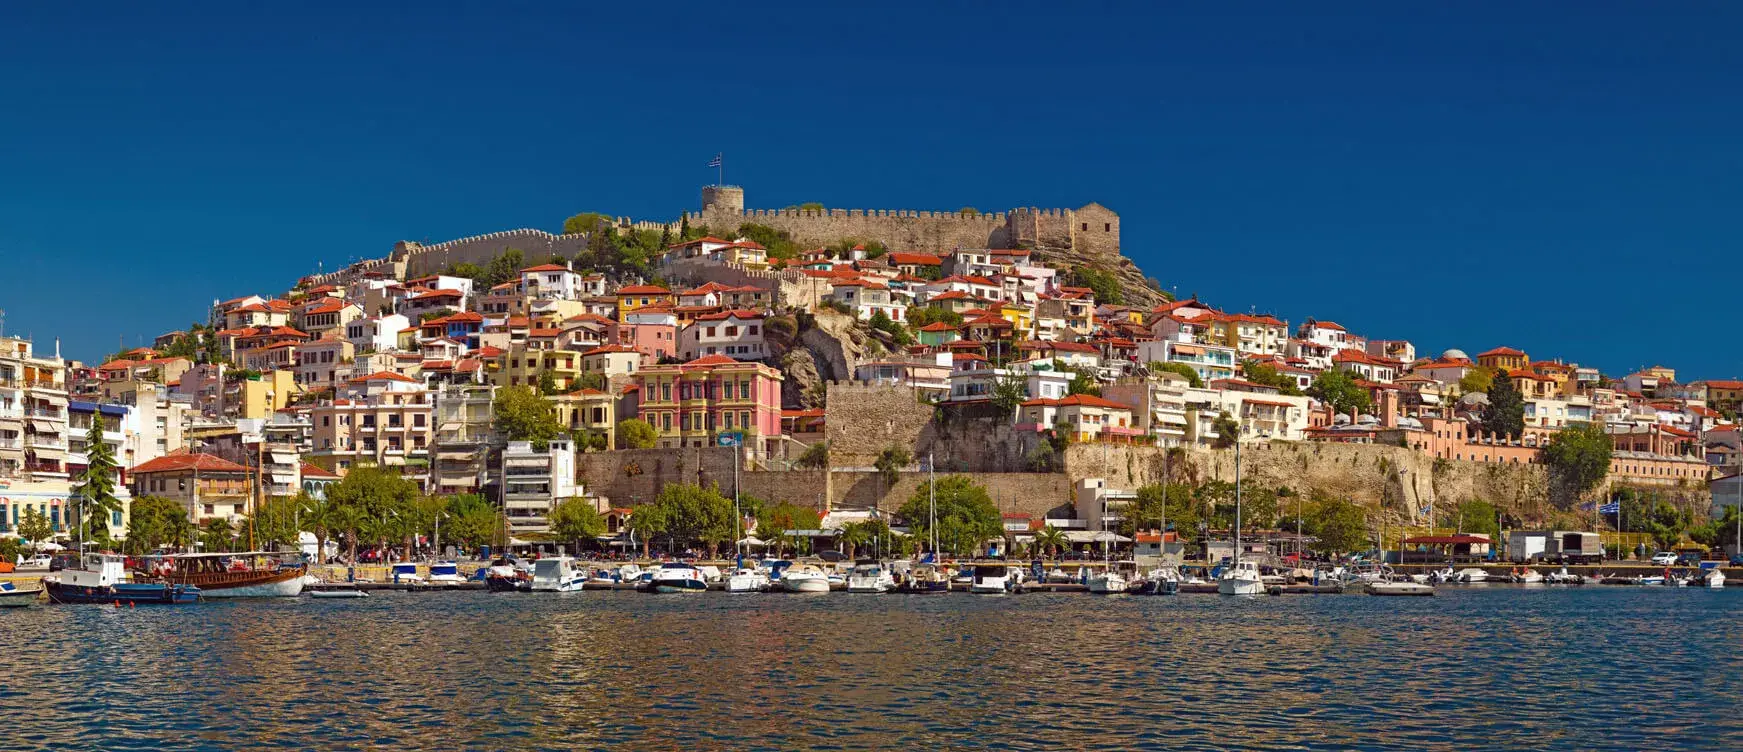 Places to see ın Kavala, Greece